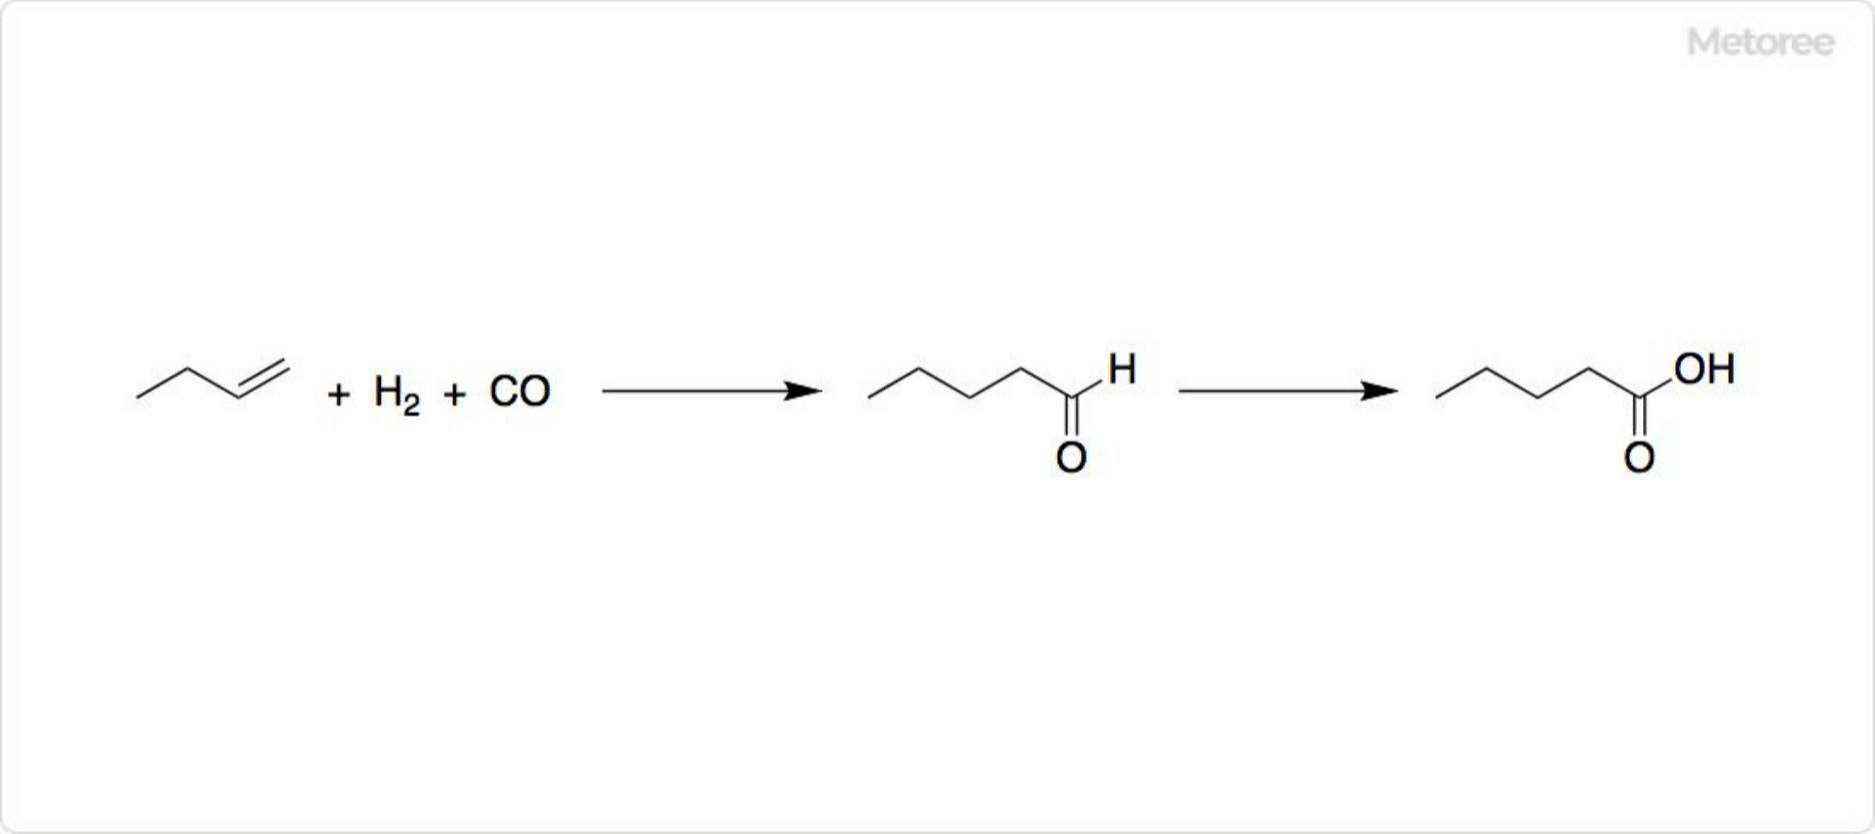 Figure 2. Synthesis of valeric acid